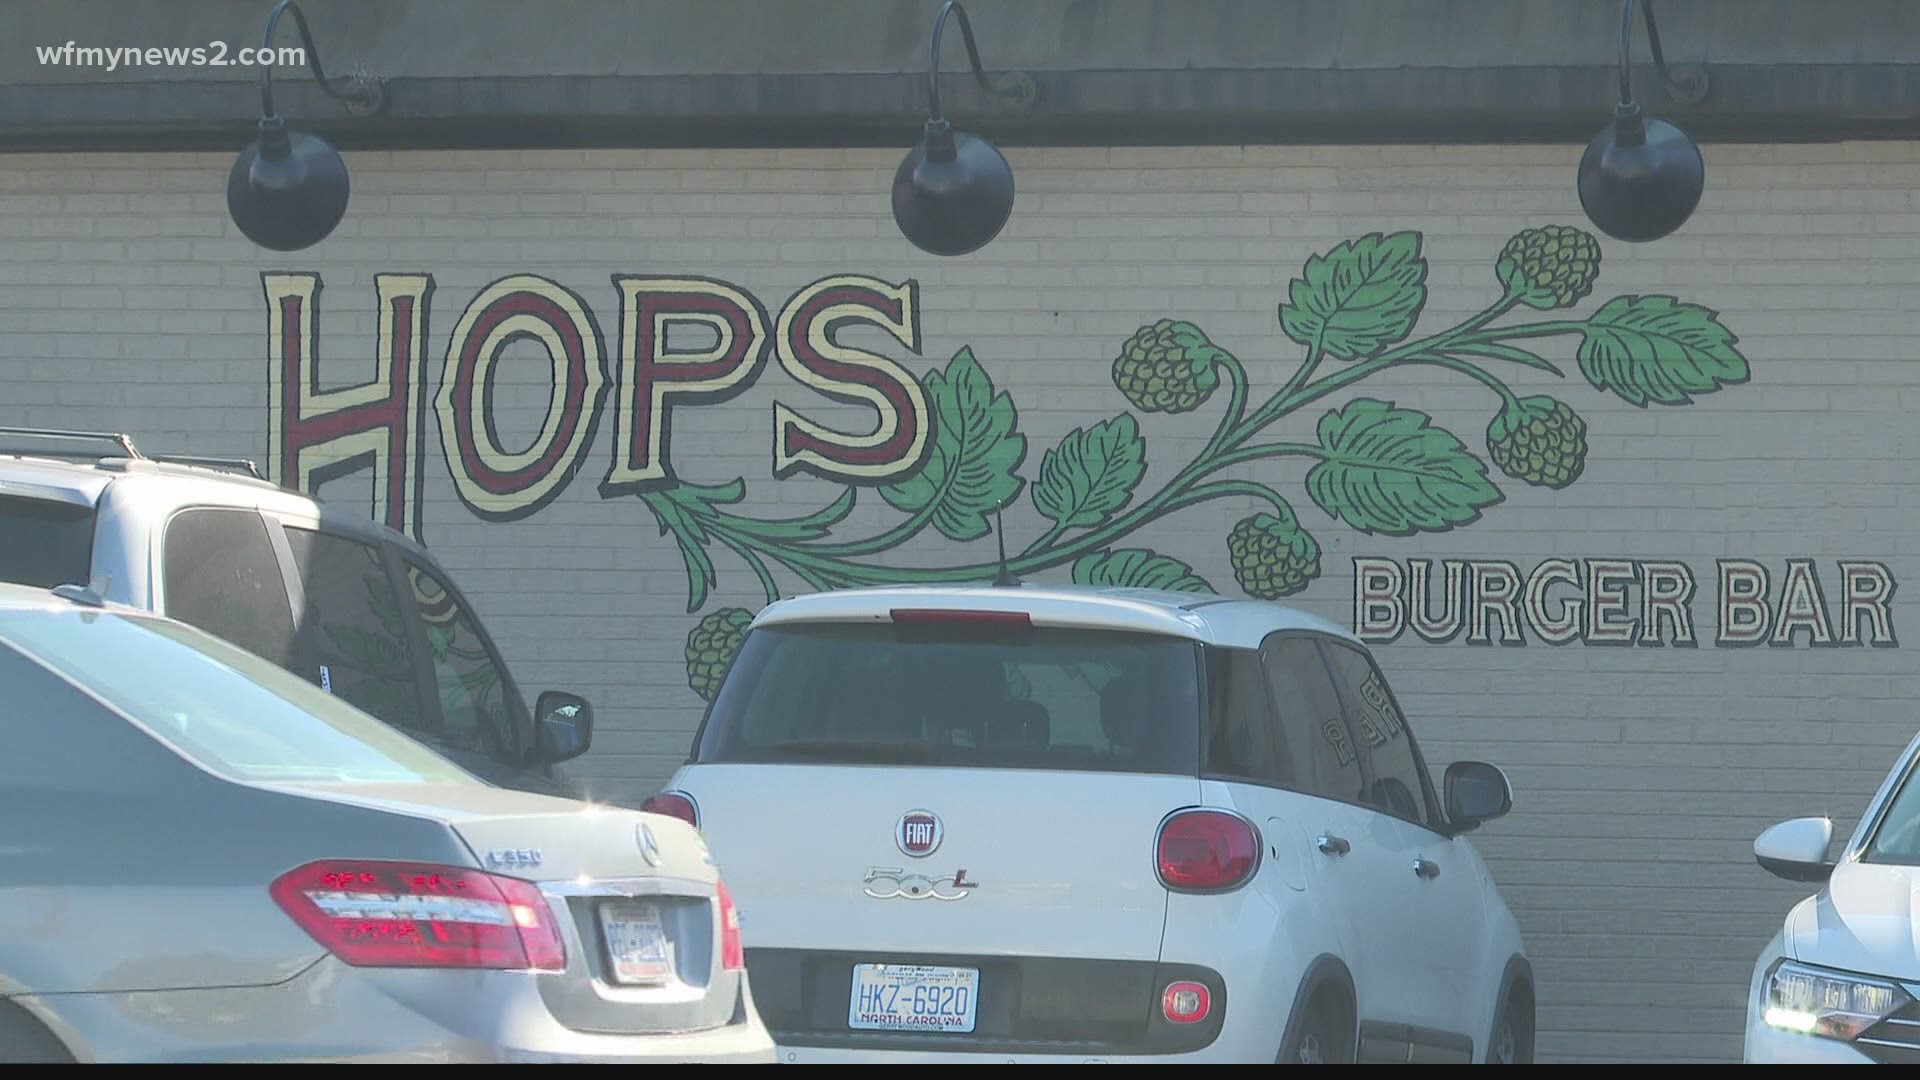 Workers at Triad Hops Burger Bar locations say management isn’t taking health and safety concerns seriously.